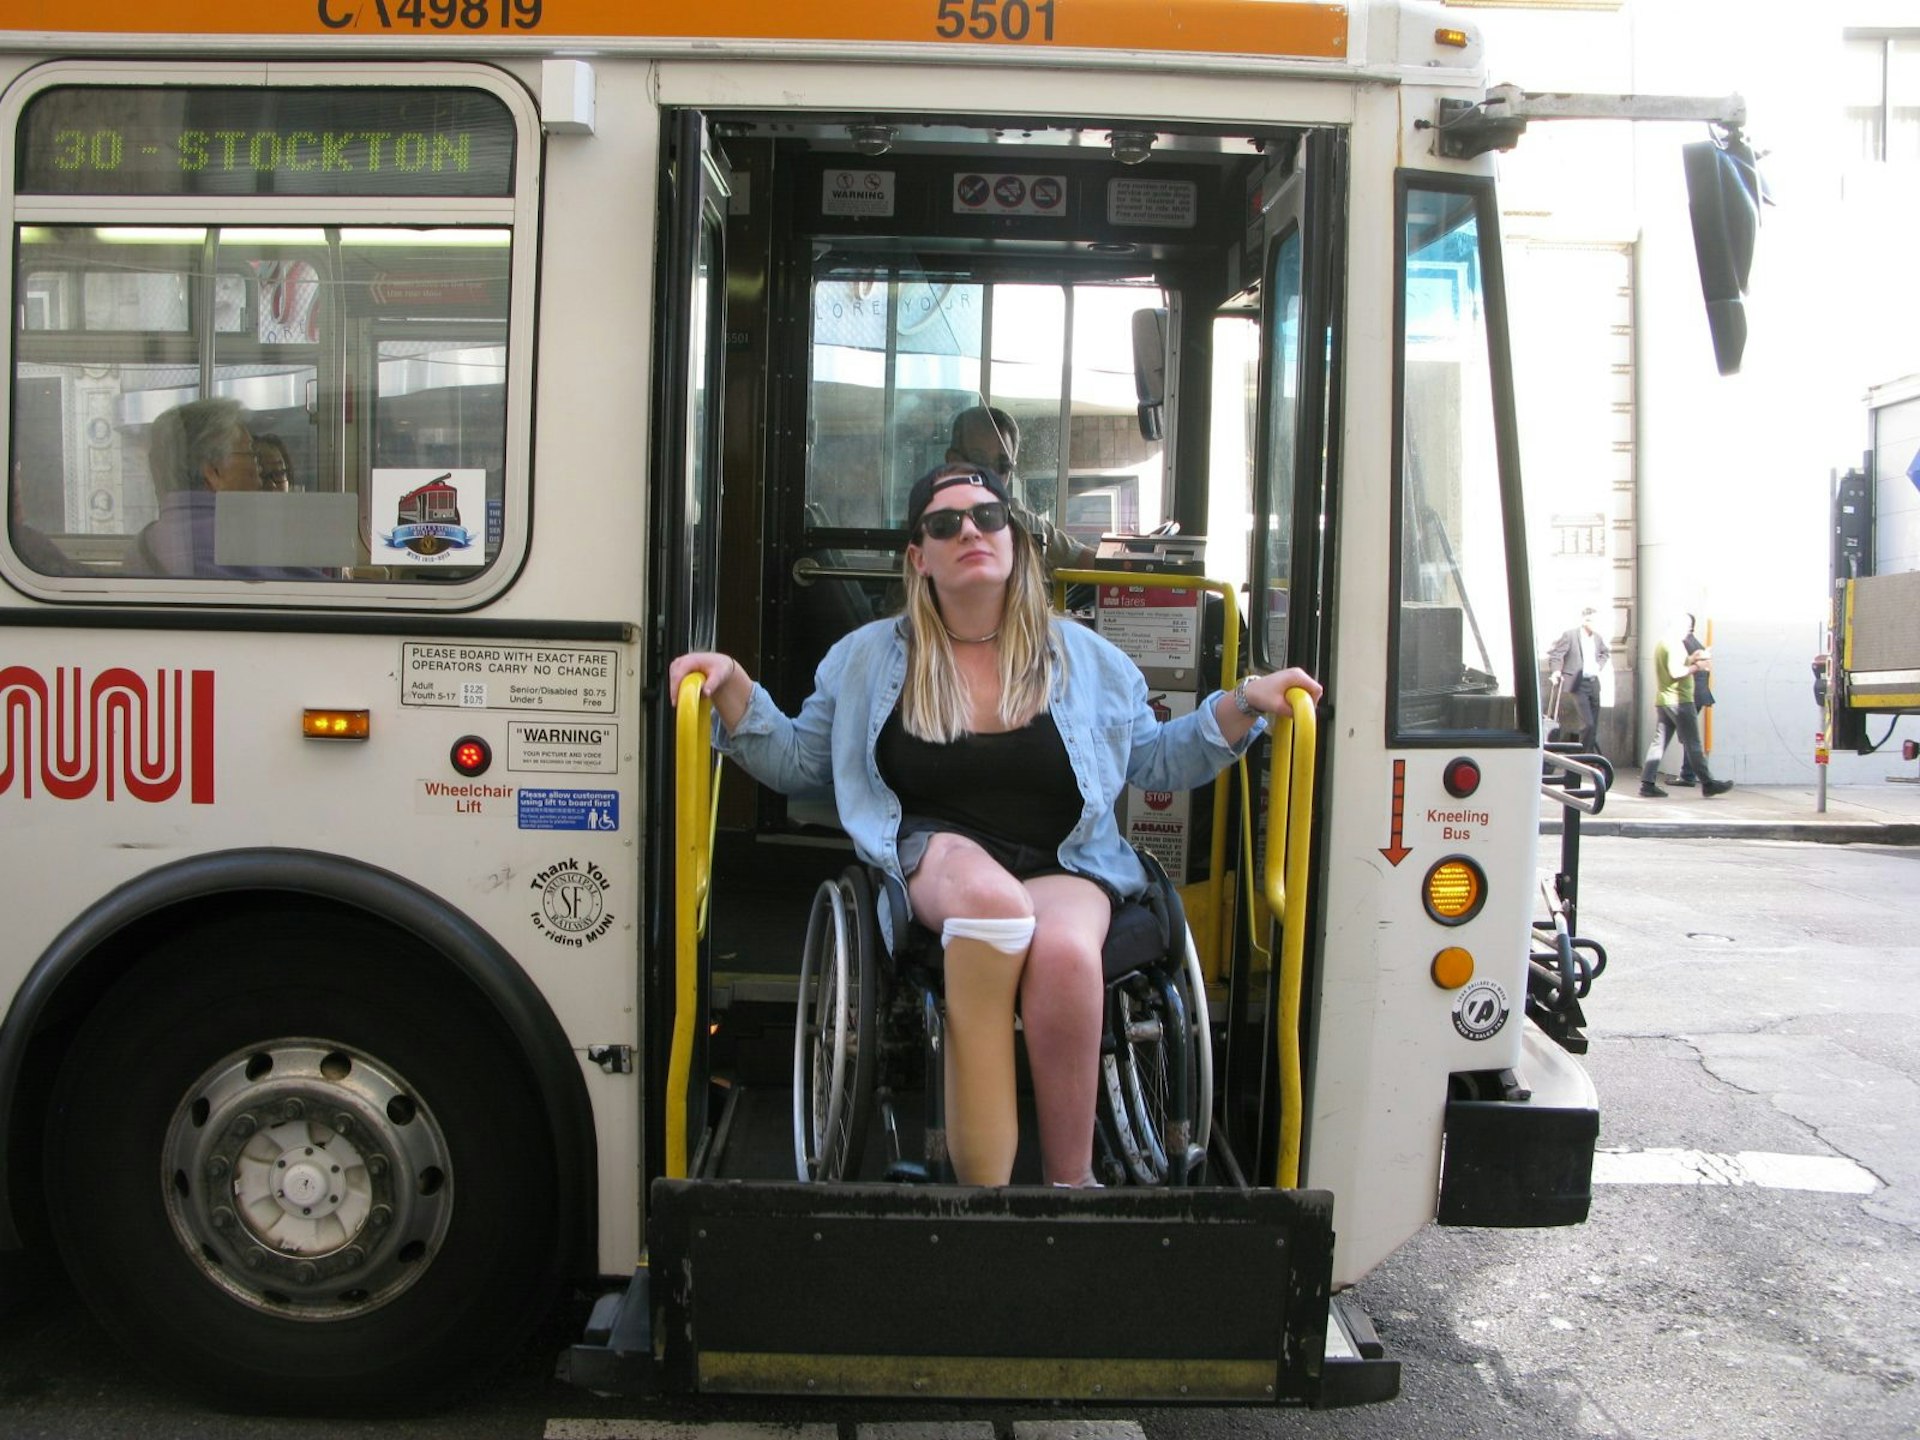 A woman in a wheelchair is alighting from a bus.